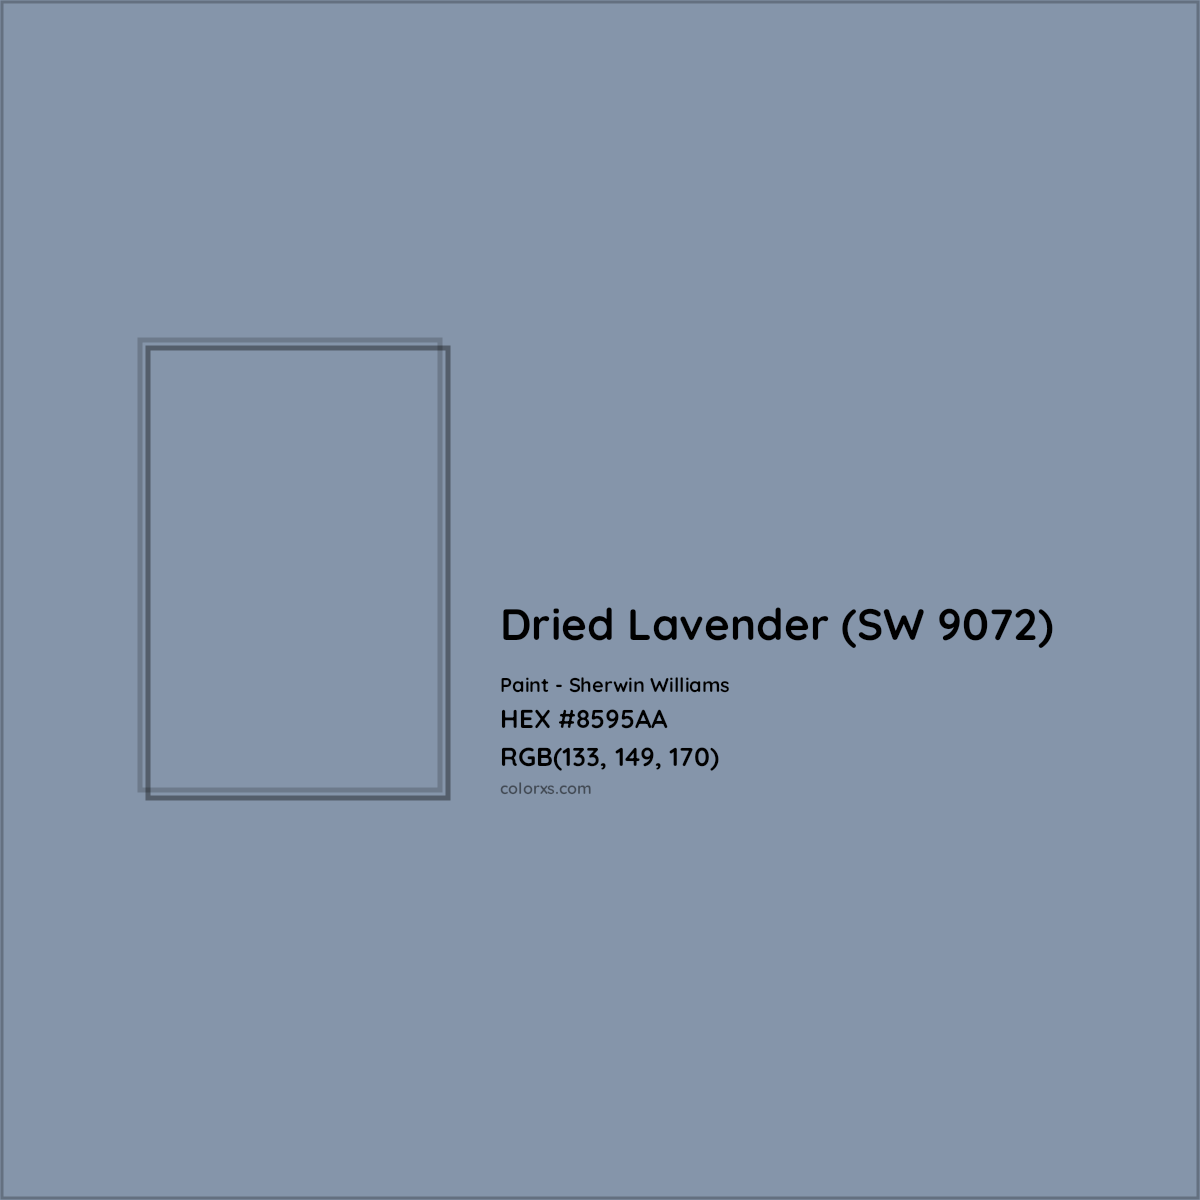 HEX #8595AA Dried Lavender (SW 9072) Paint Sherwin Williams - Color Code